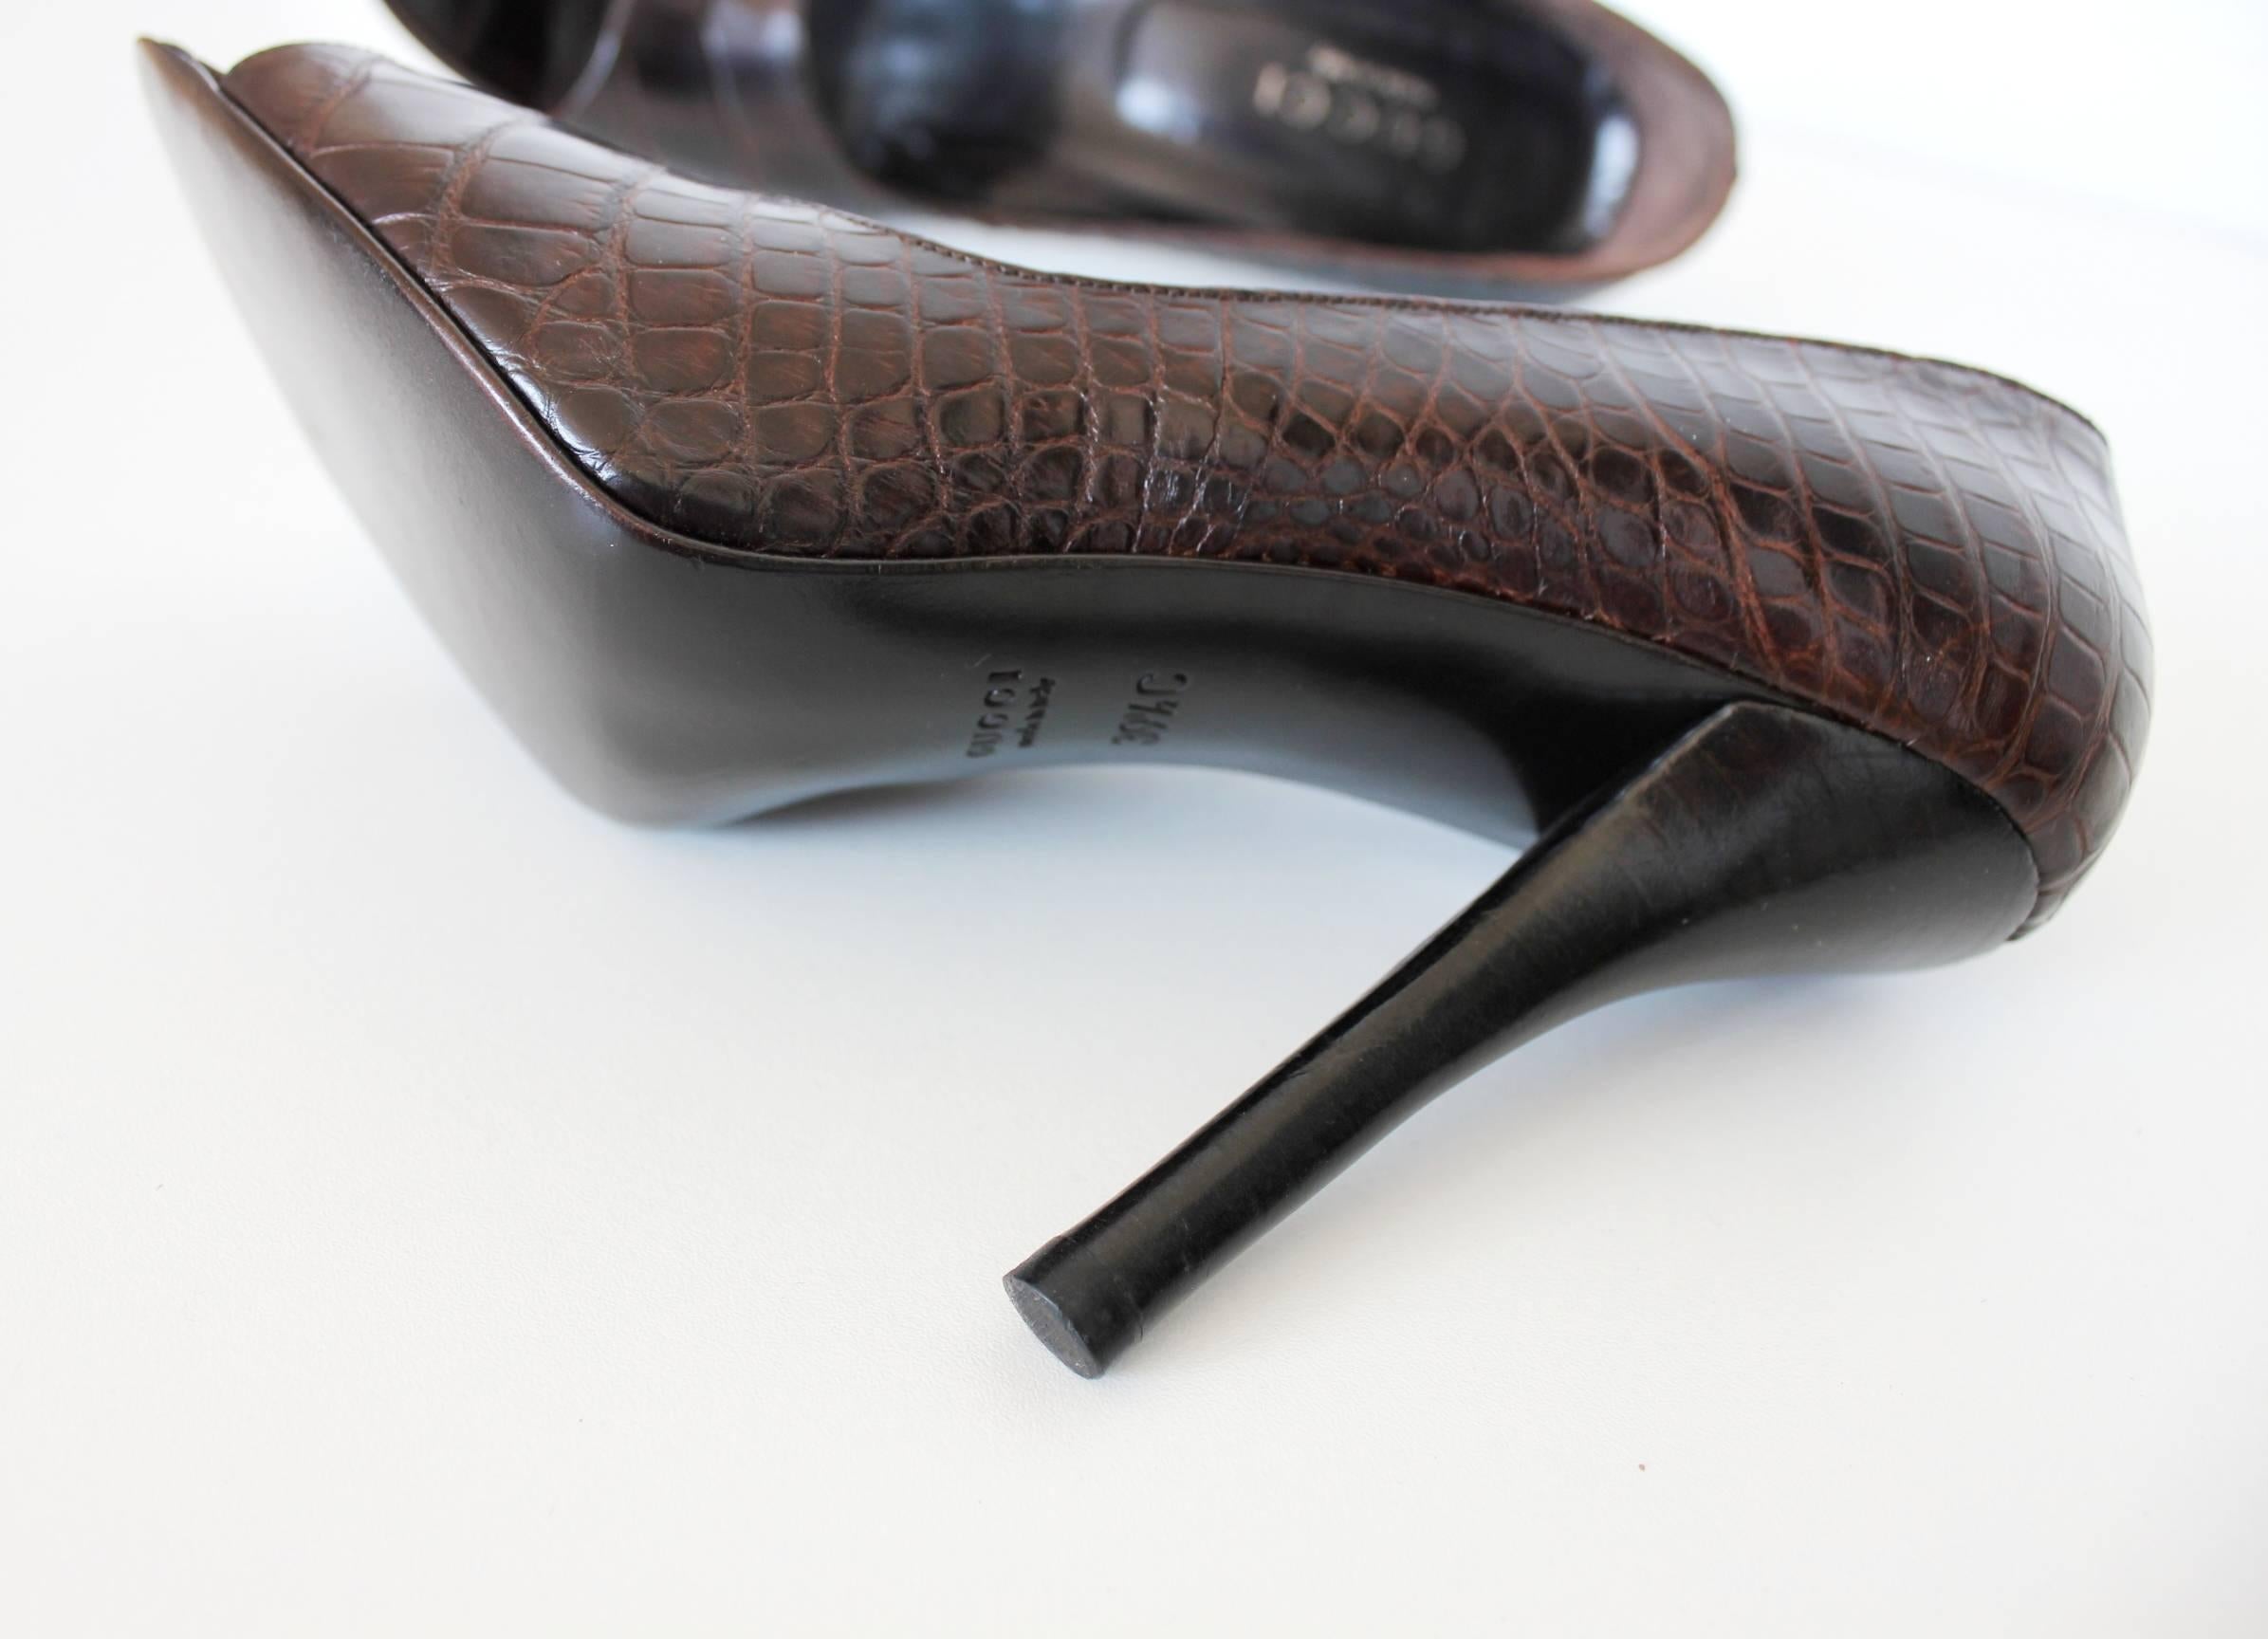 NEW Gucci Exotic Chocolate Brown Alligator Skin High Heel Peep Toes Sandals 39.5 For Sale 2